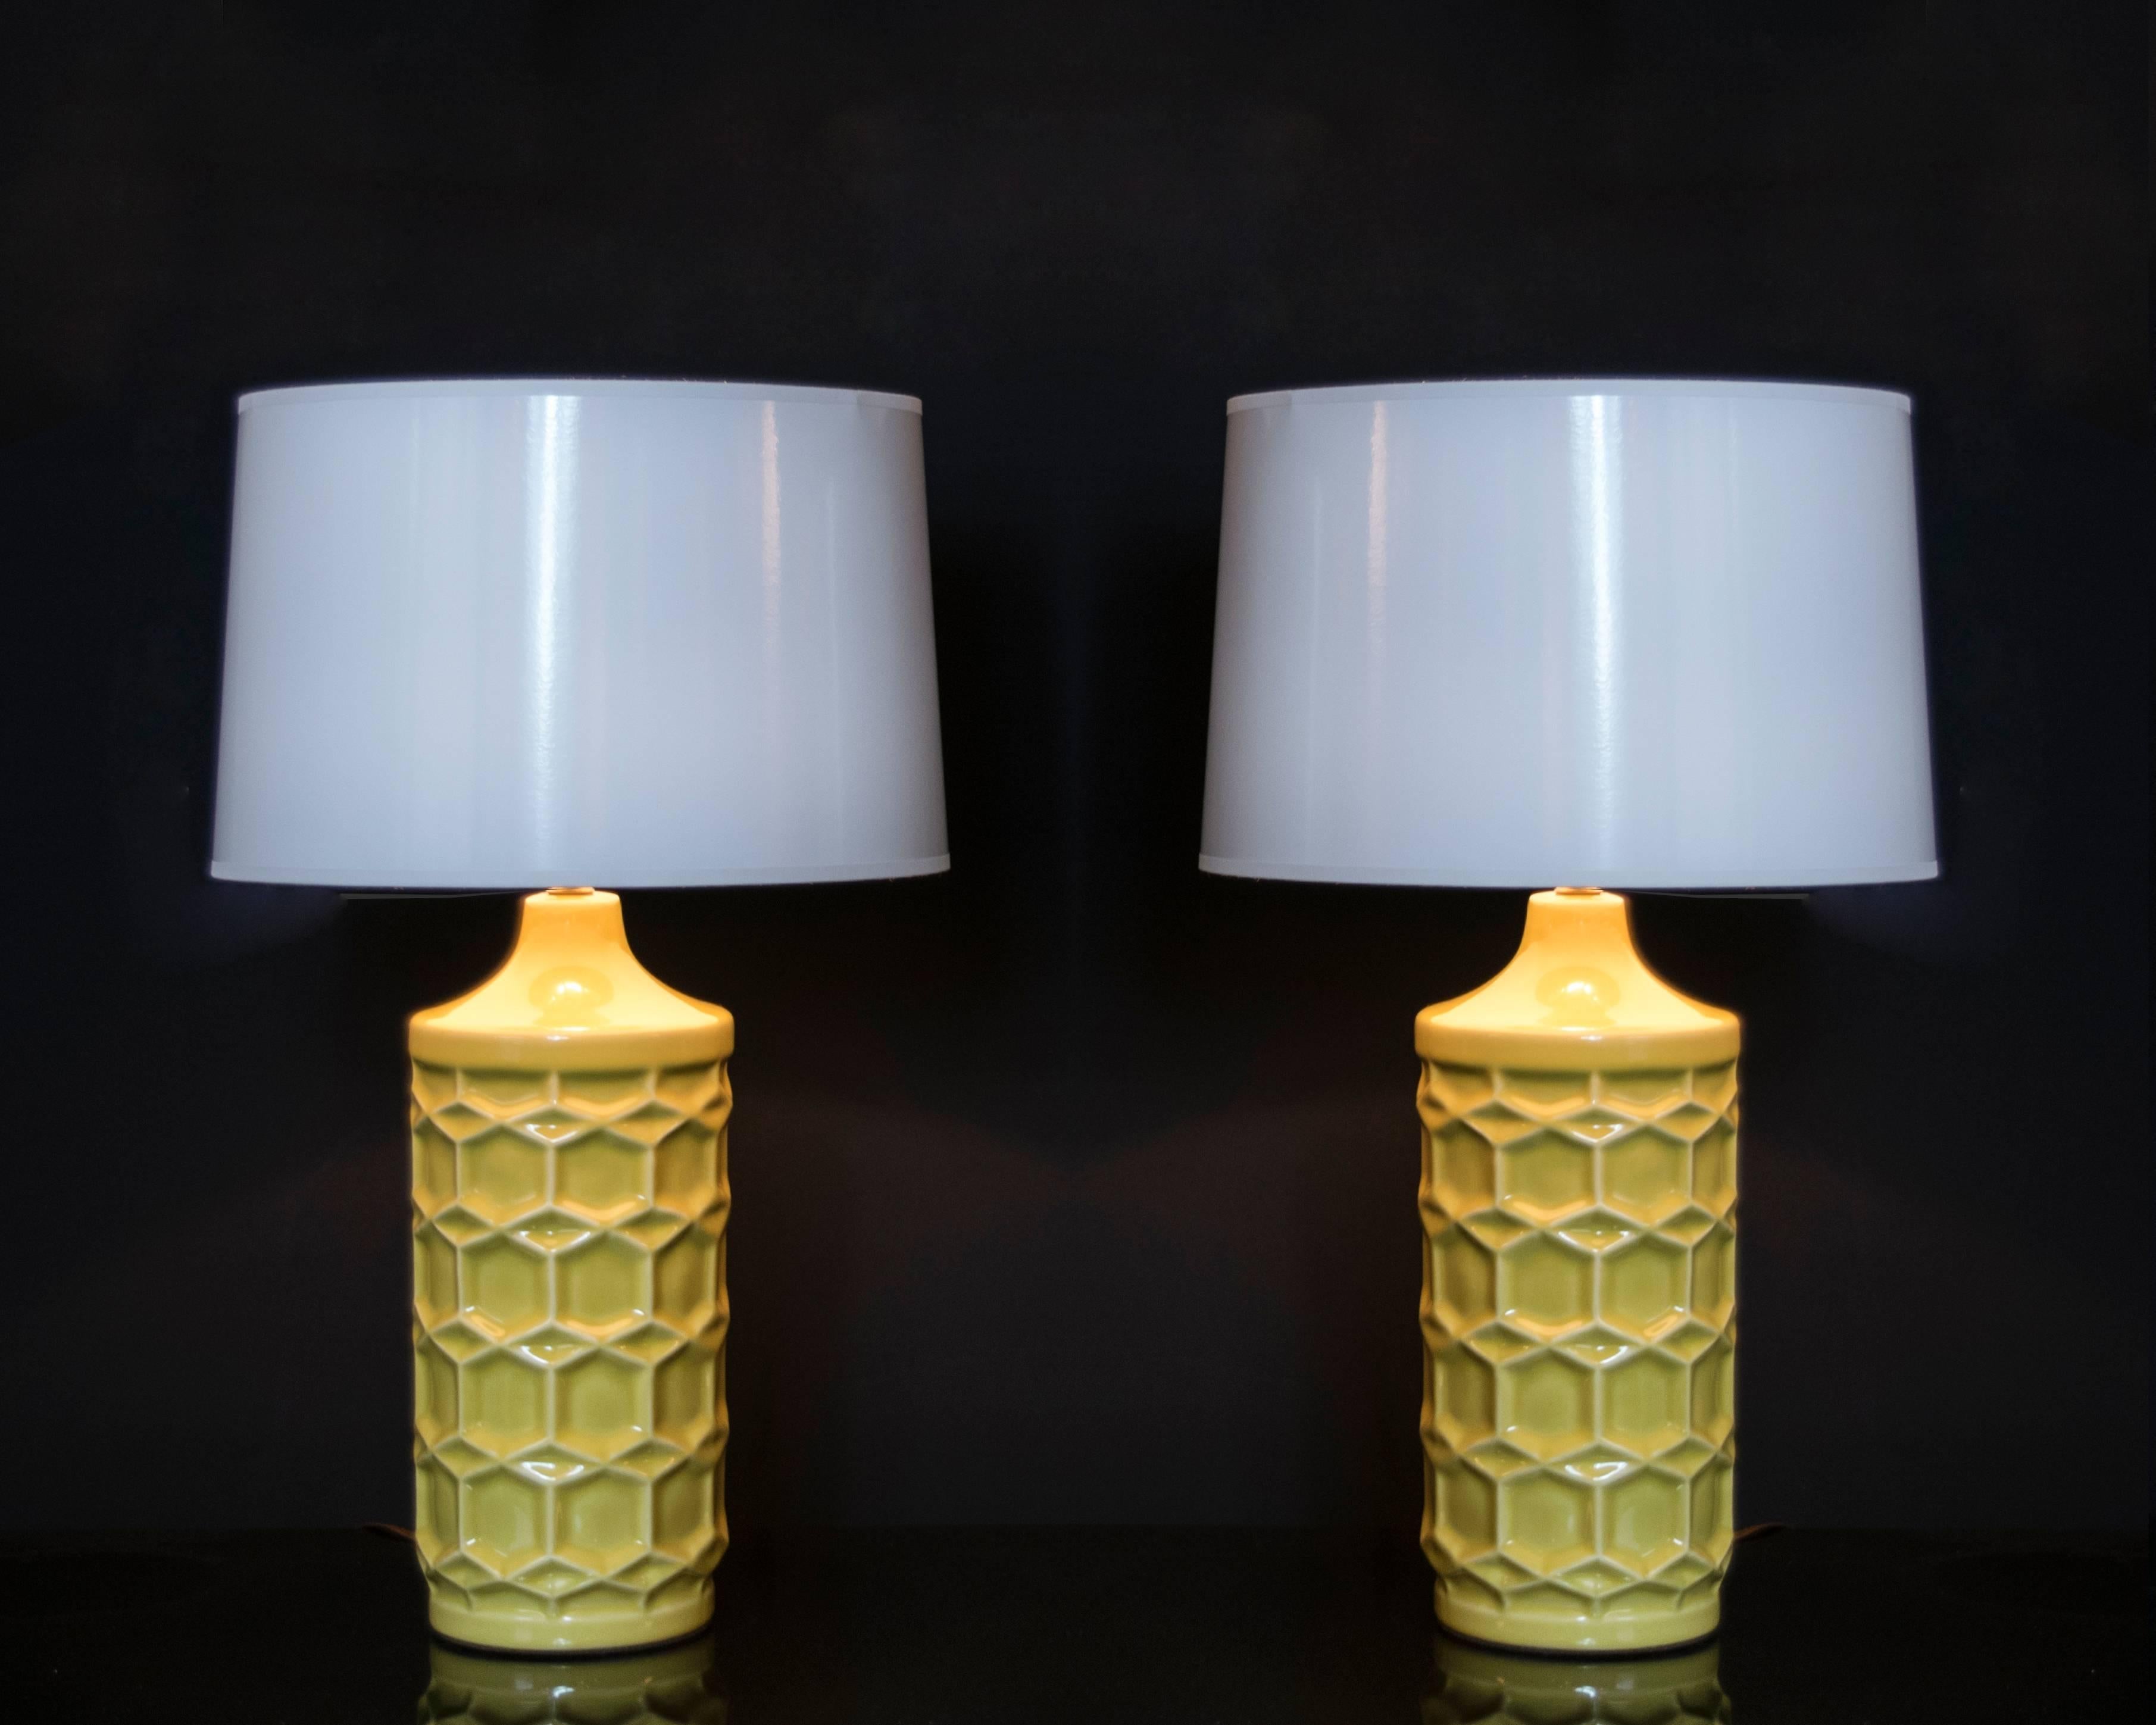 Wonderful pair of matte gold/yellow ceramic honeycomb lamps. These lamps are sure to add a bright spot of color to any room.